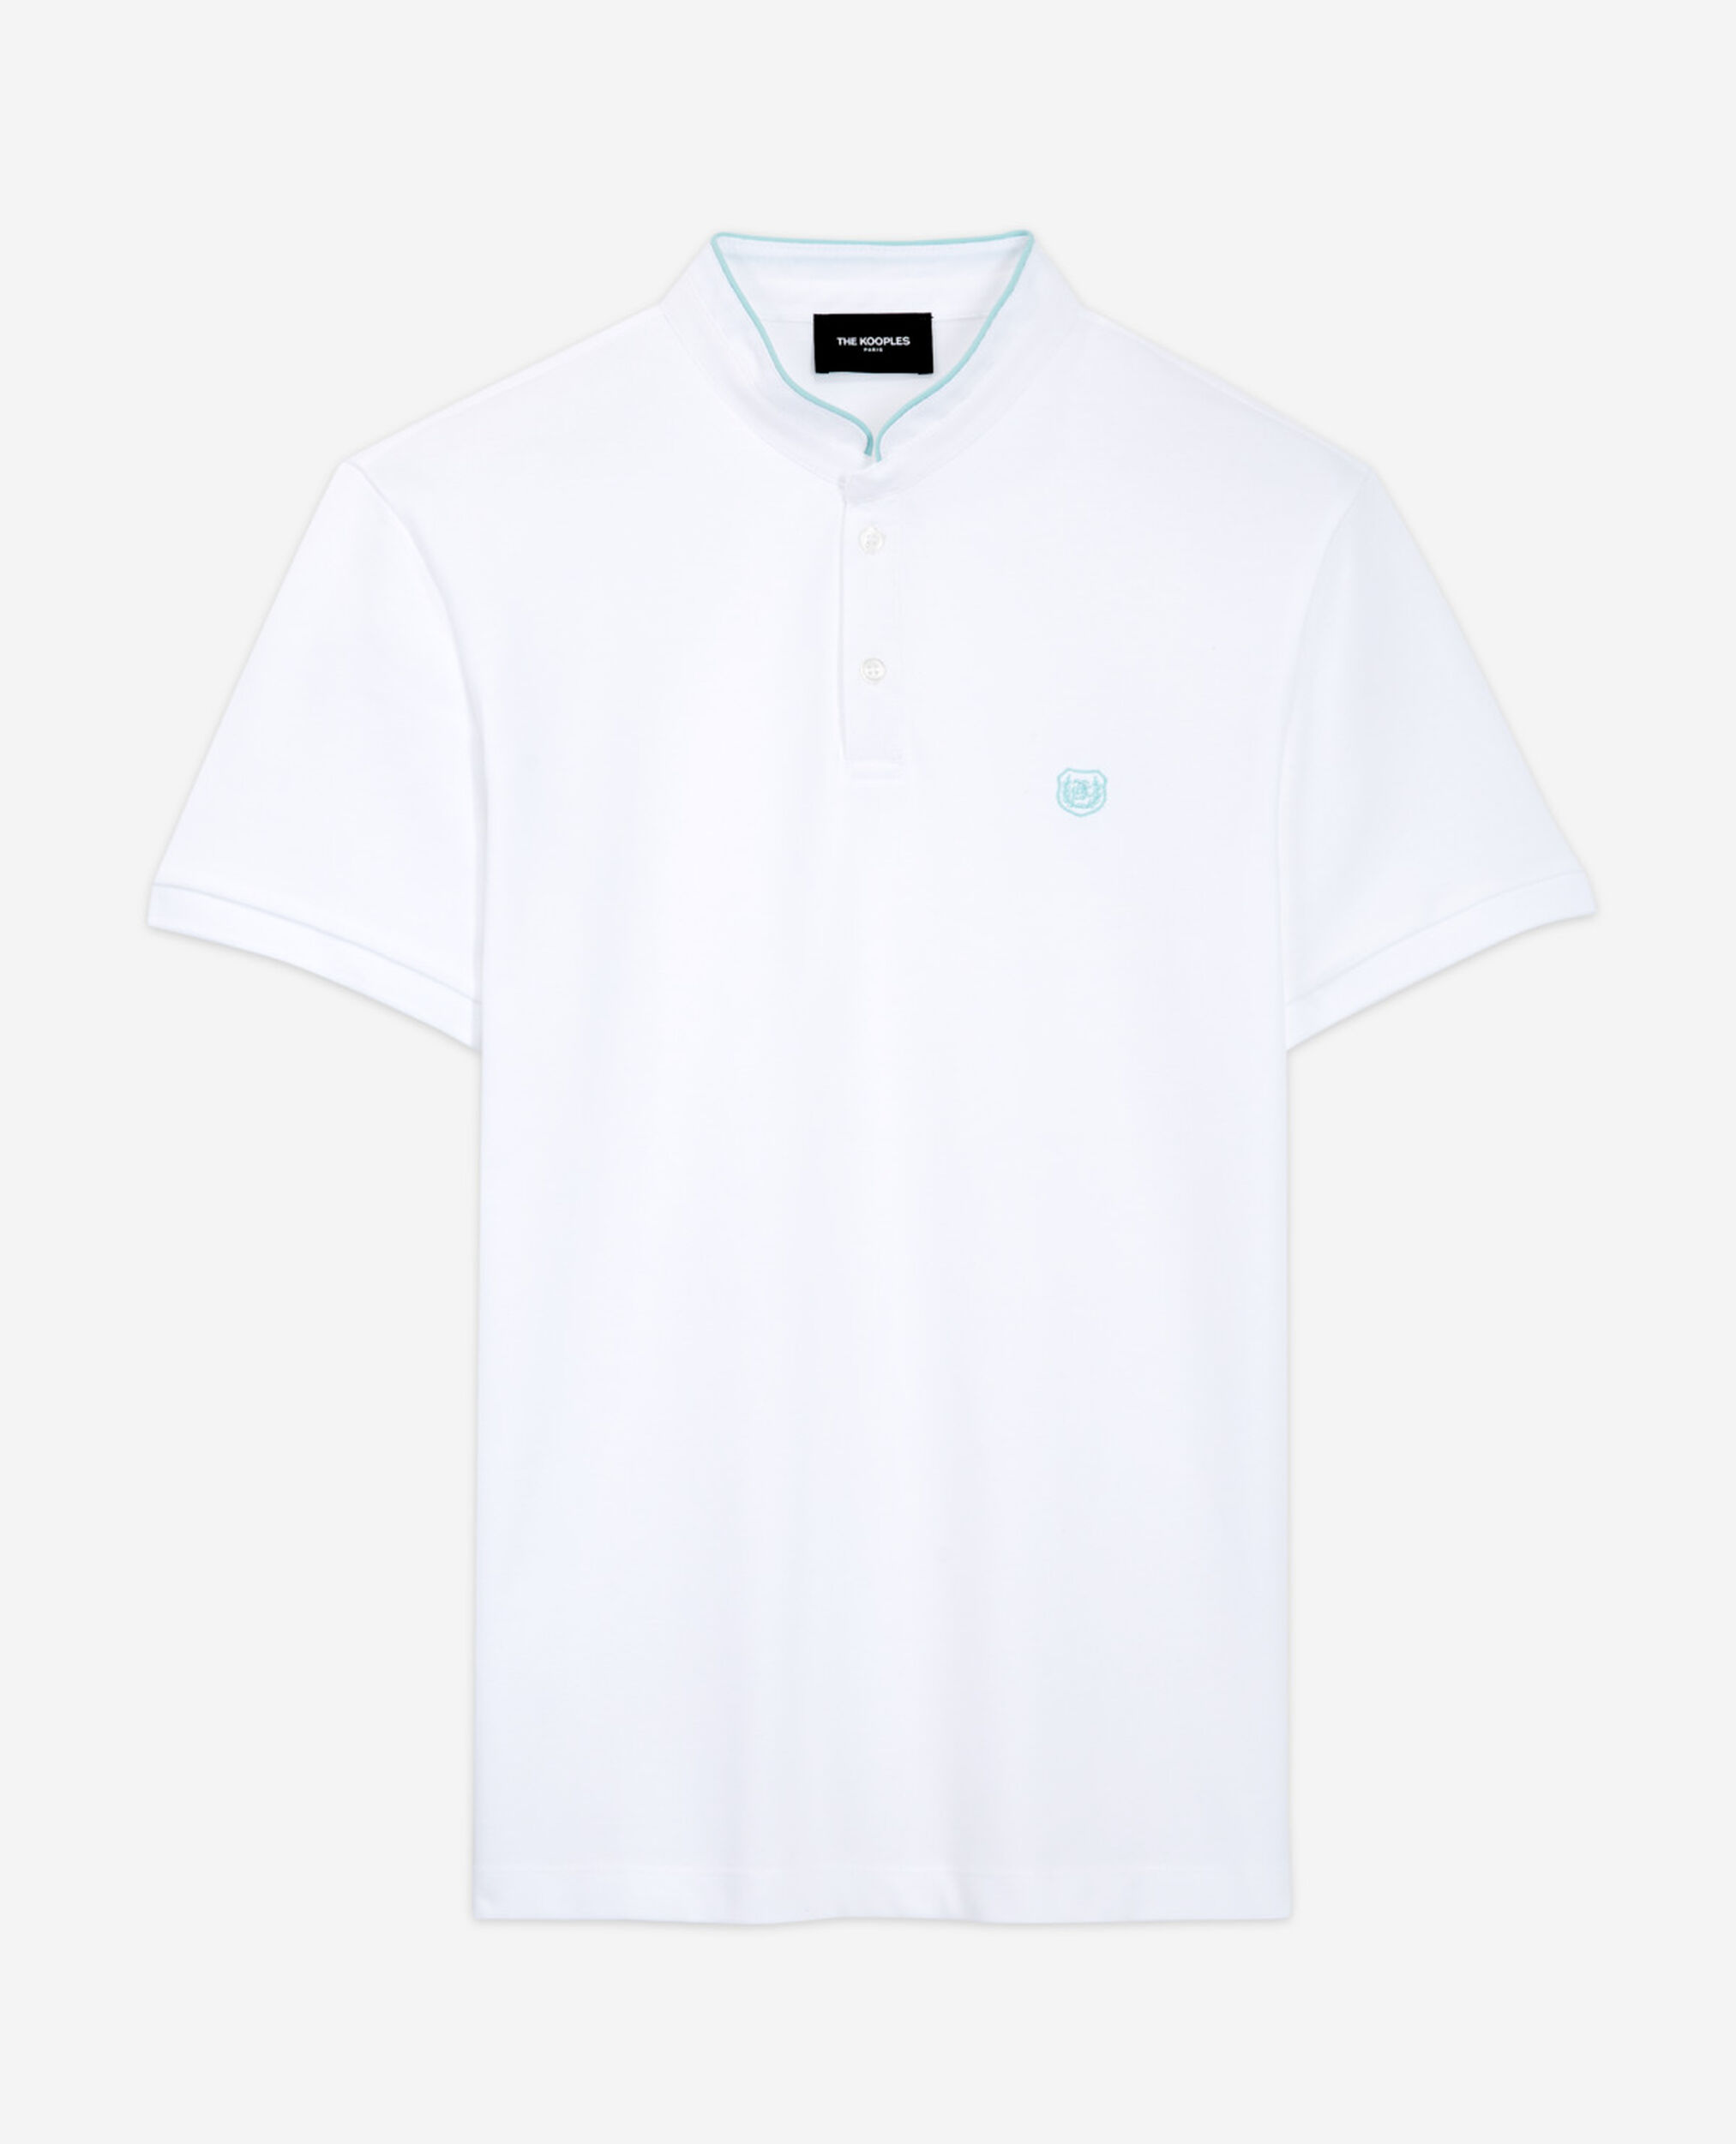 Embroidered white polo w/ buttoned officer collar, WHITE / GREY, hi-res image number null